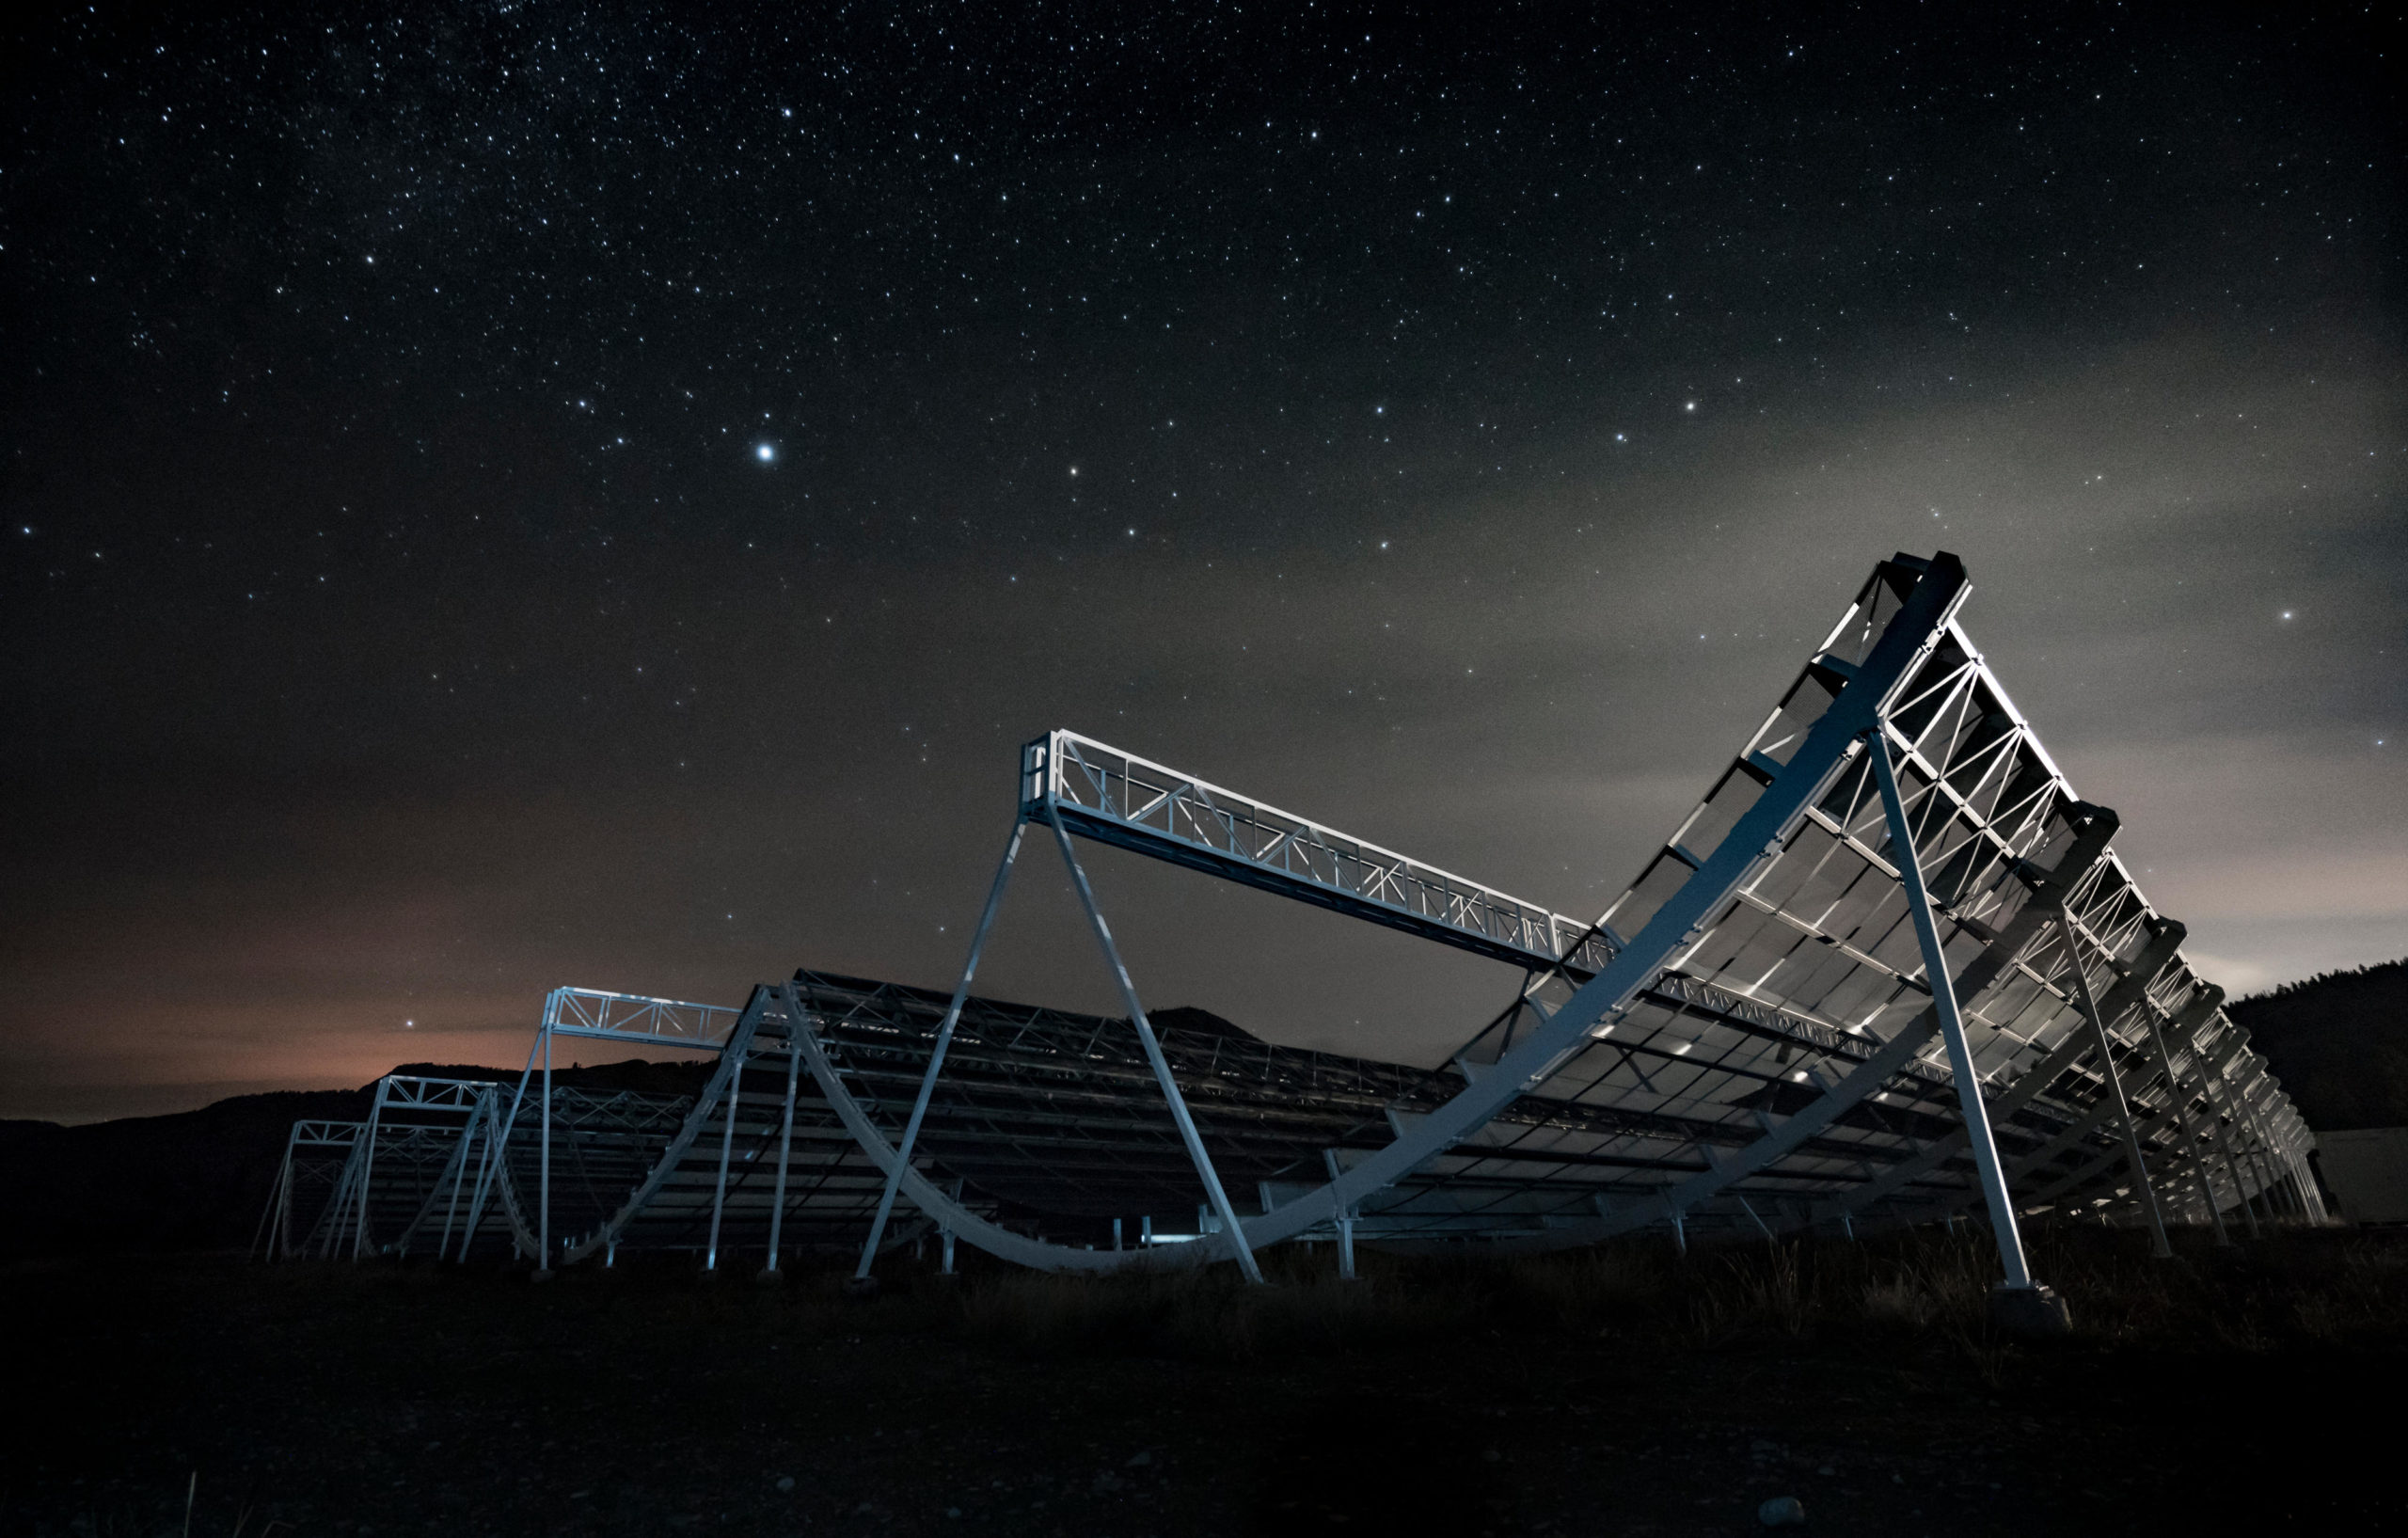 The CHIME telescope. (Image: Andre Renard / CHIME Collaboration)